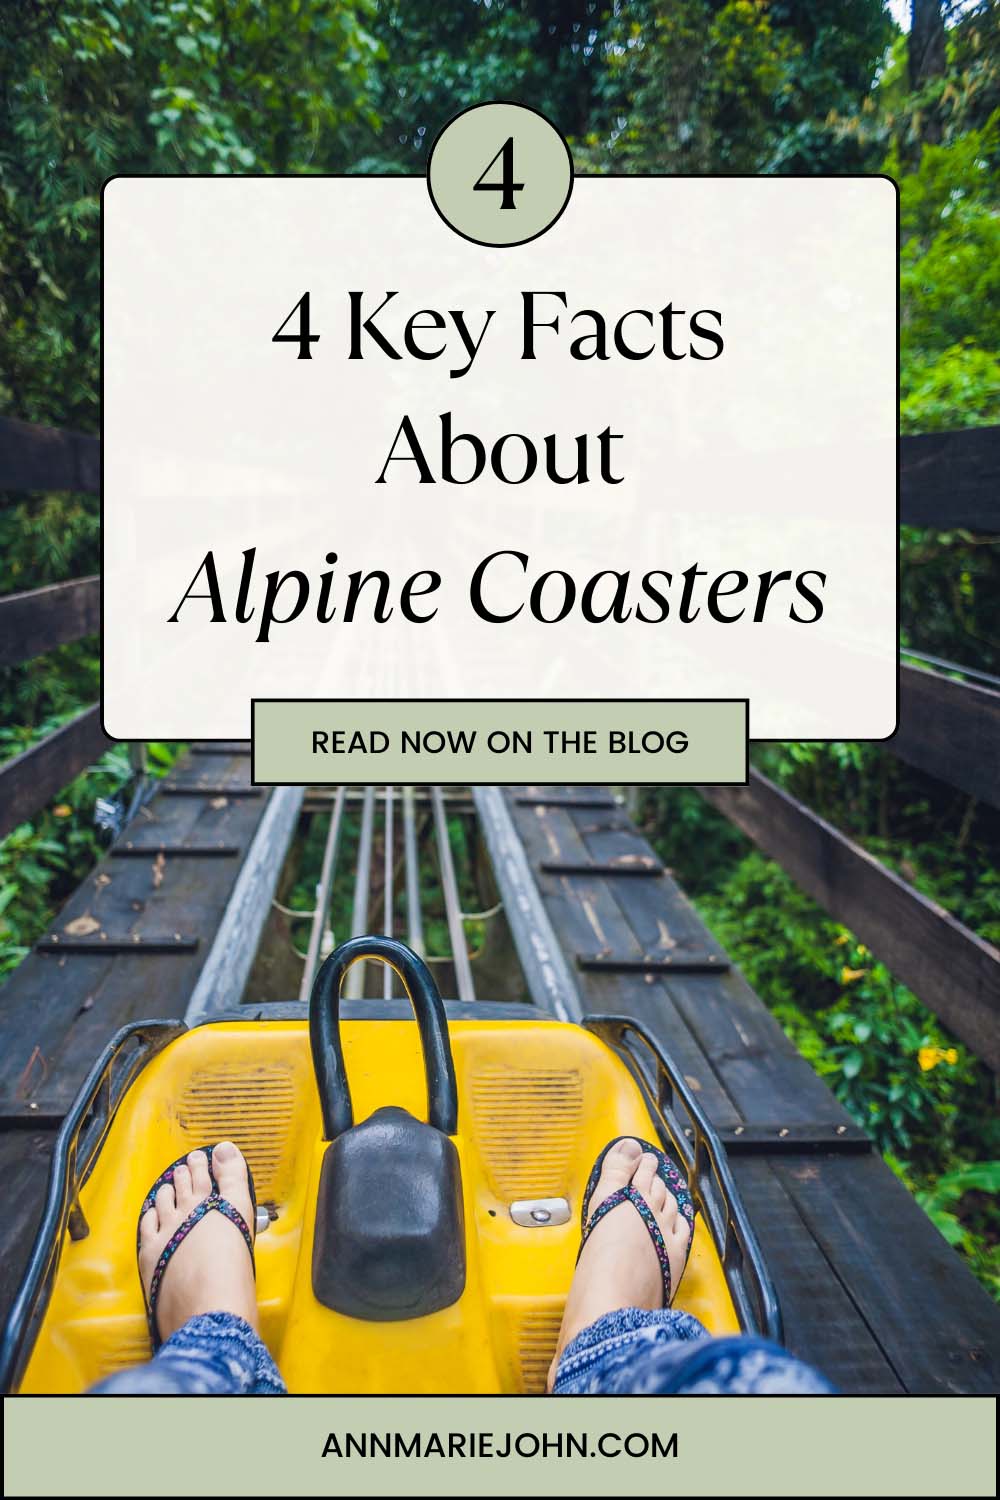 4 Key Facts About Alpine Coasters